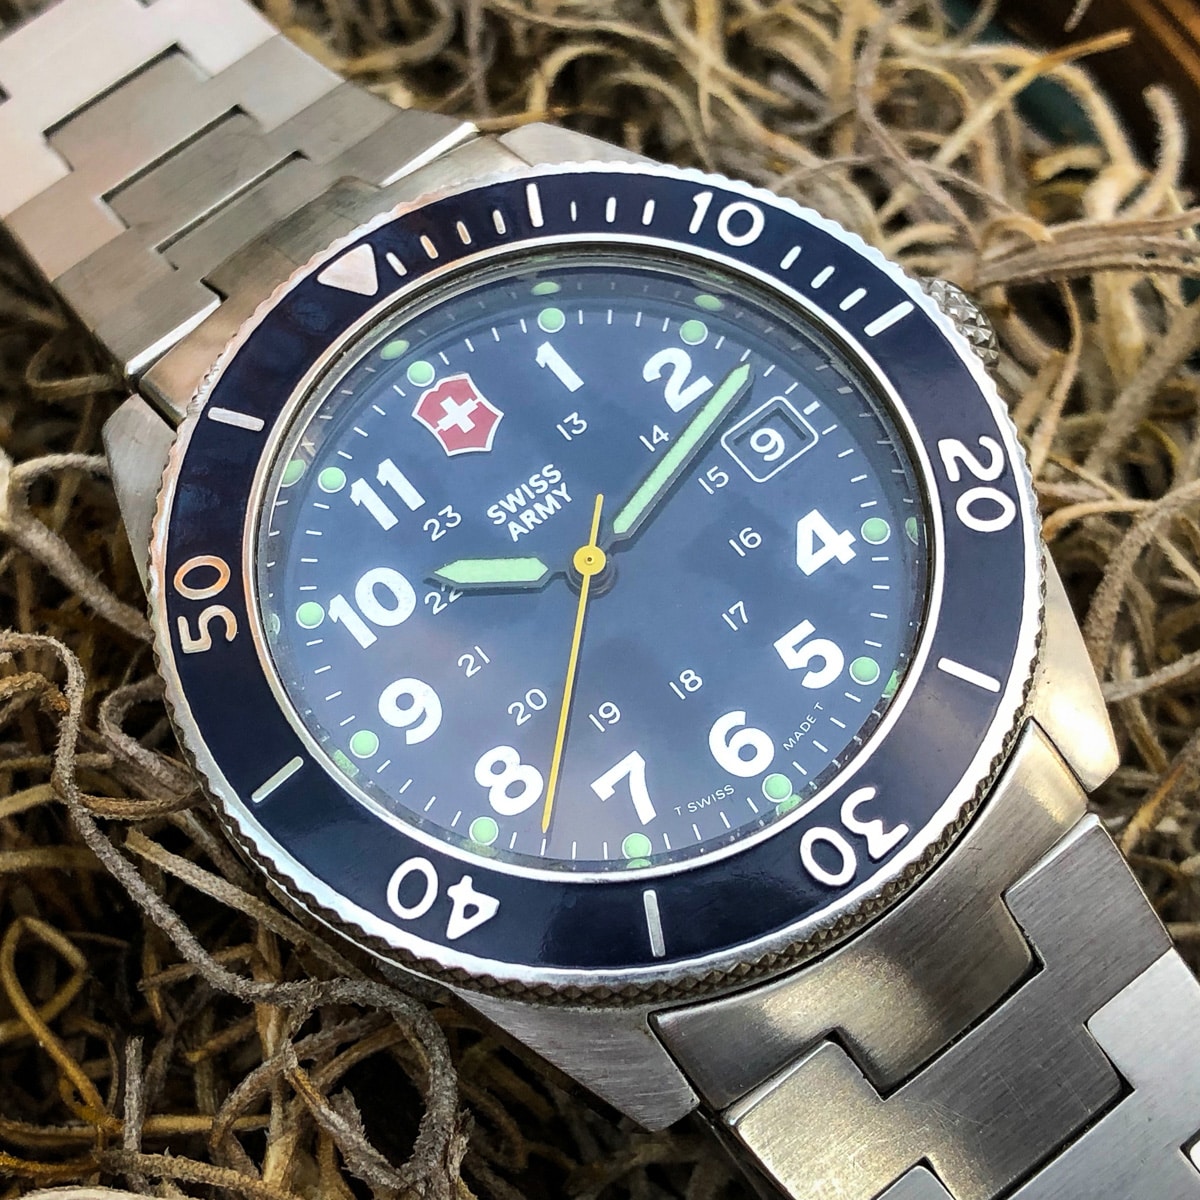 Sale > swiss military automatic watch price > in stock